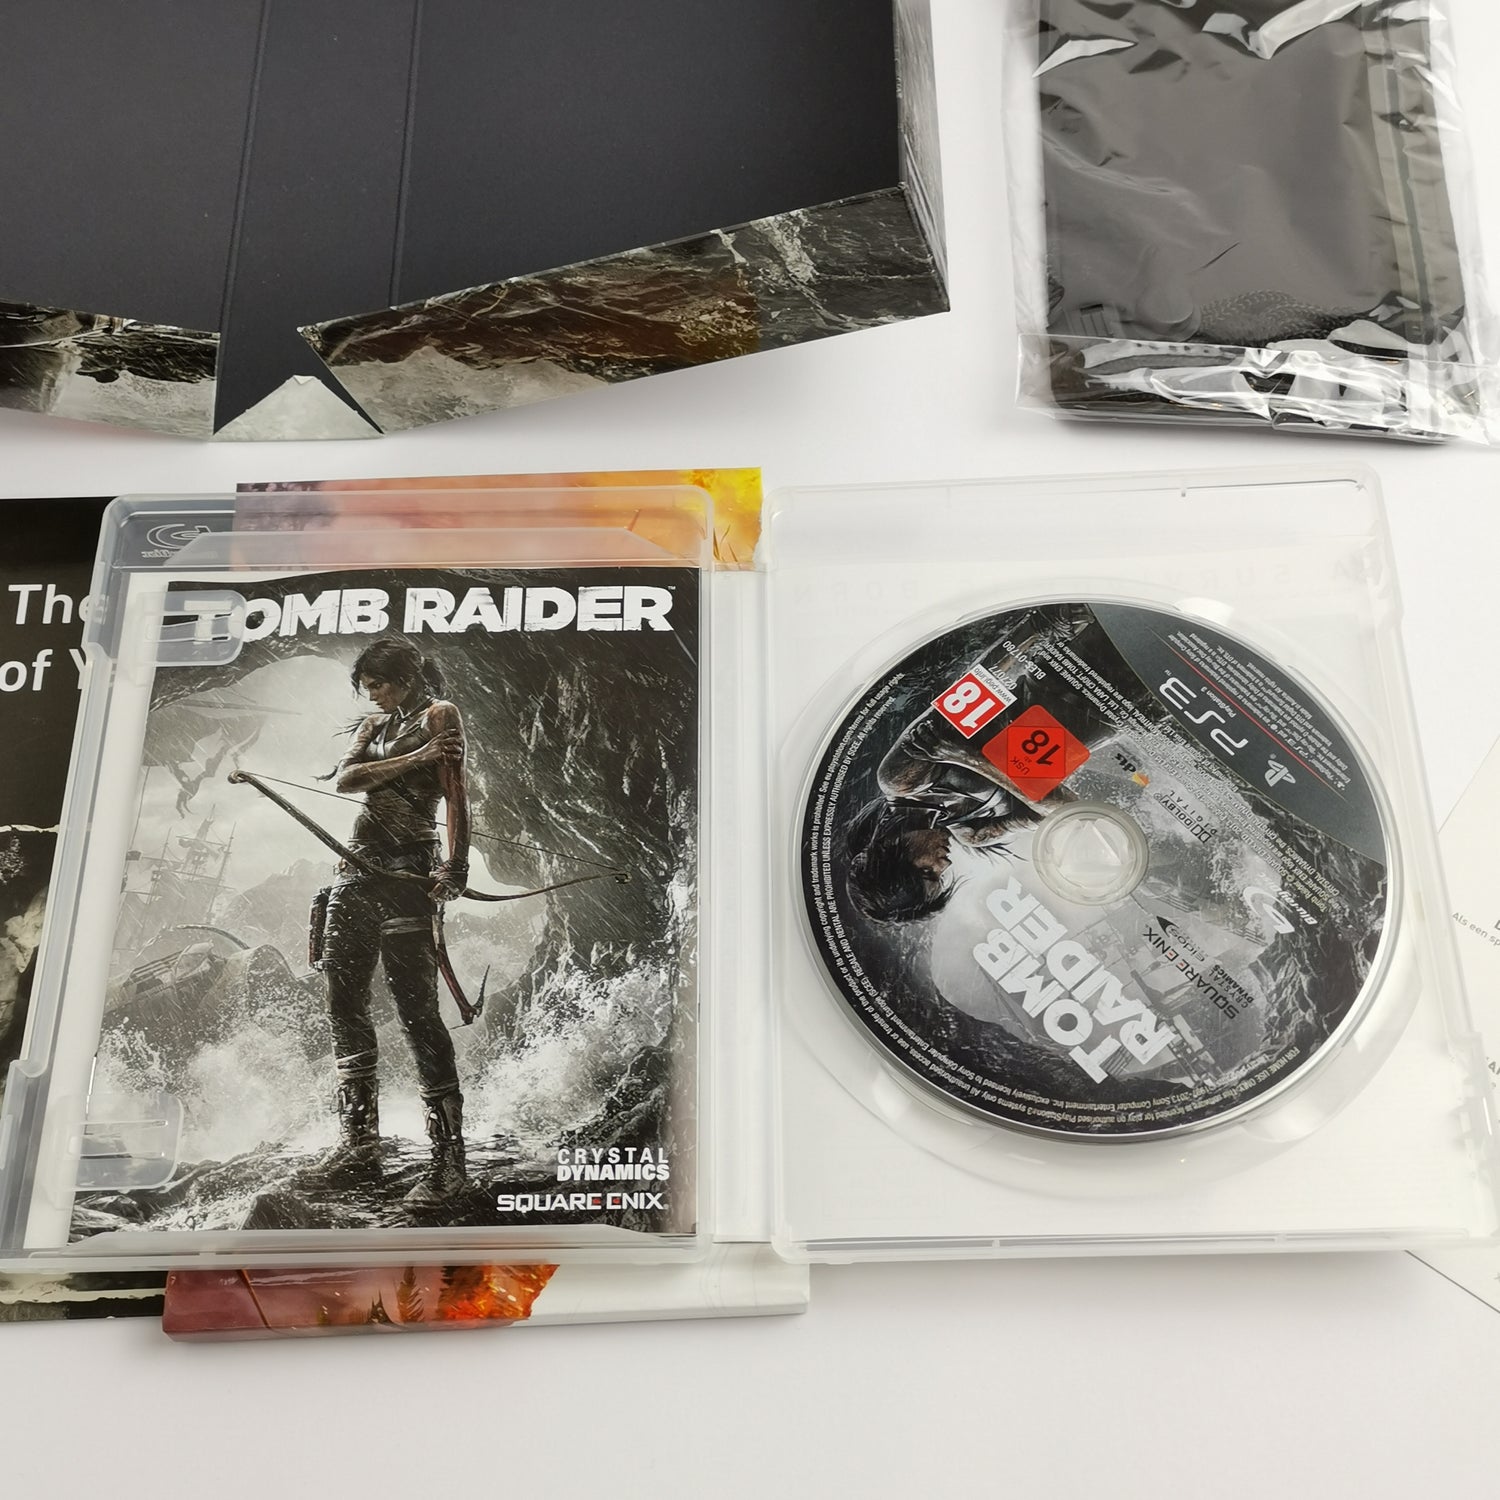 Sony Playstation 3 Spiel : Tomb Raider Survival Edition | PS3 Game - OVP USK18